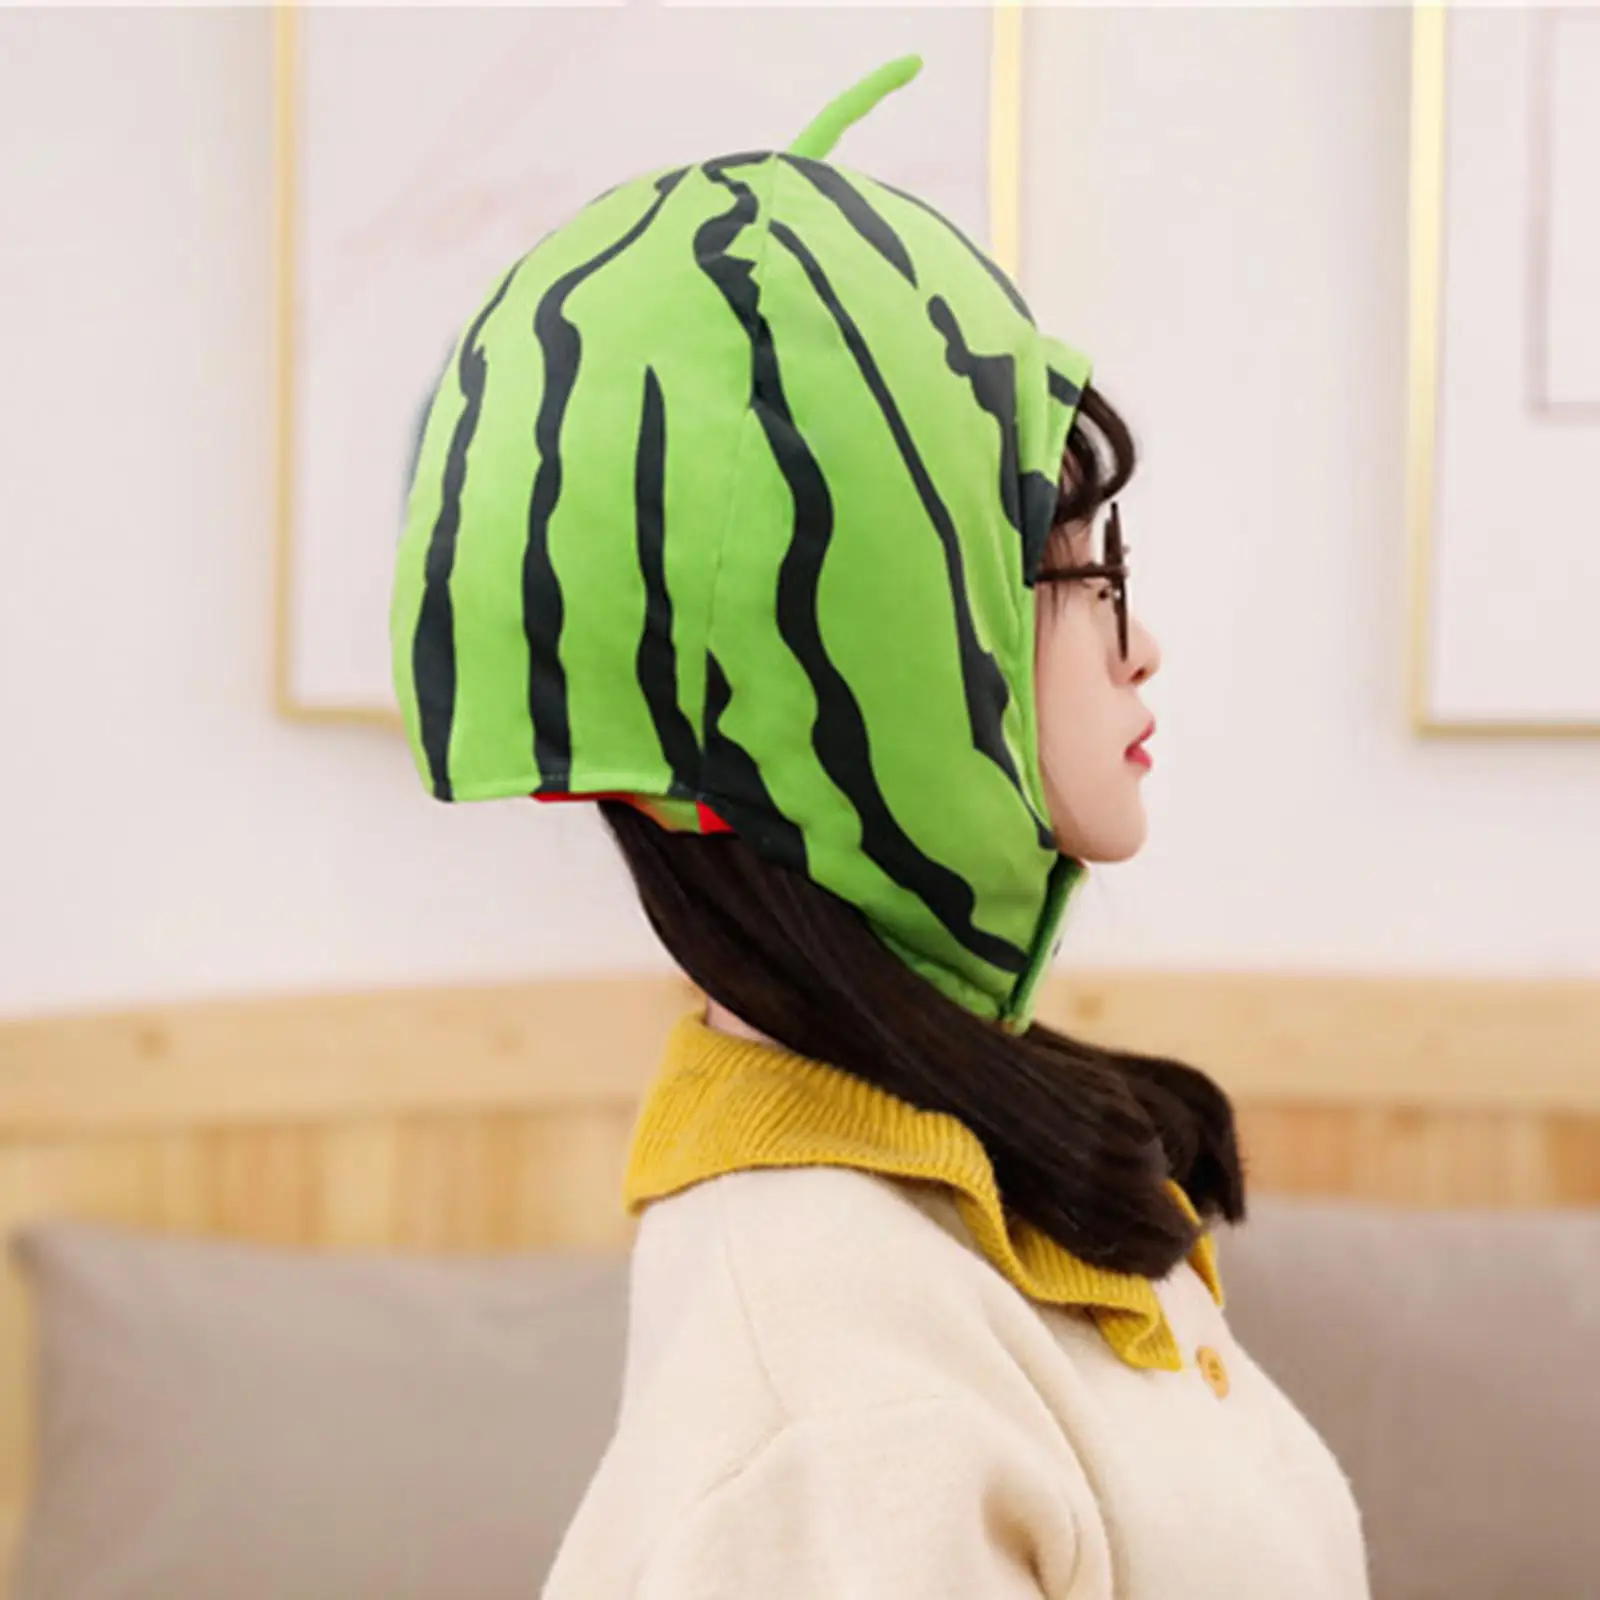 Watermelon Hat Comfortable Head Cover Headgear Novelty for Party Photo Props